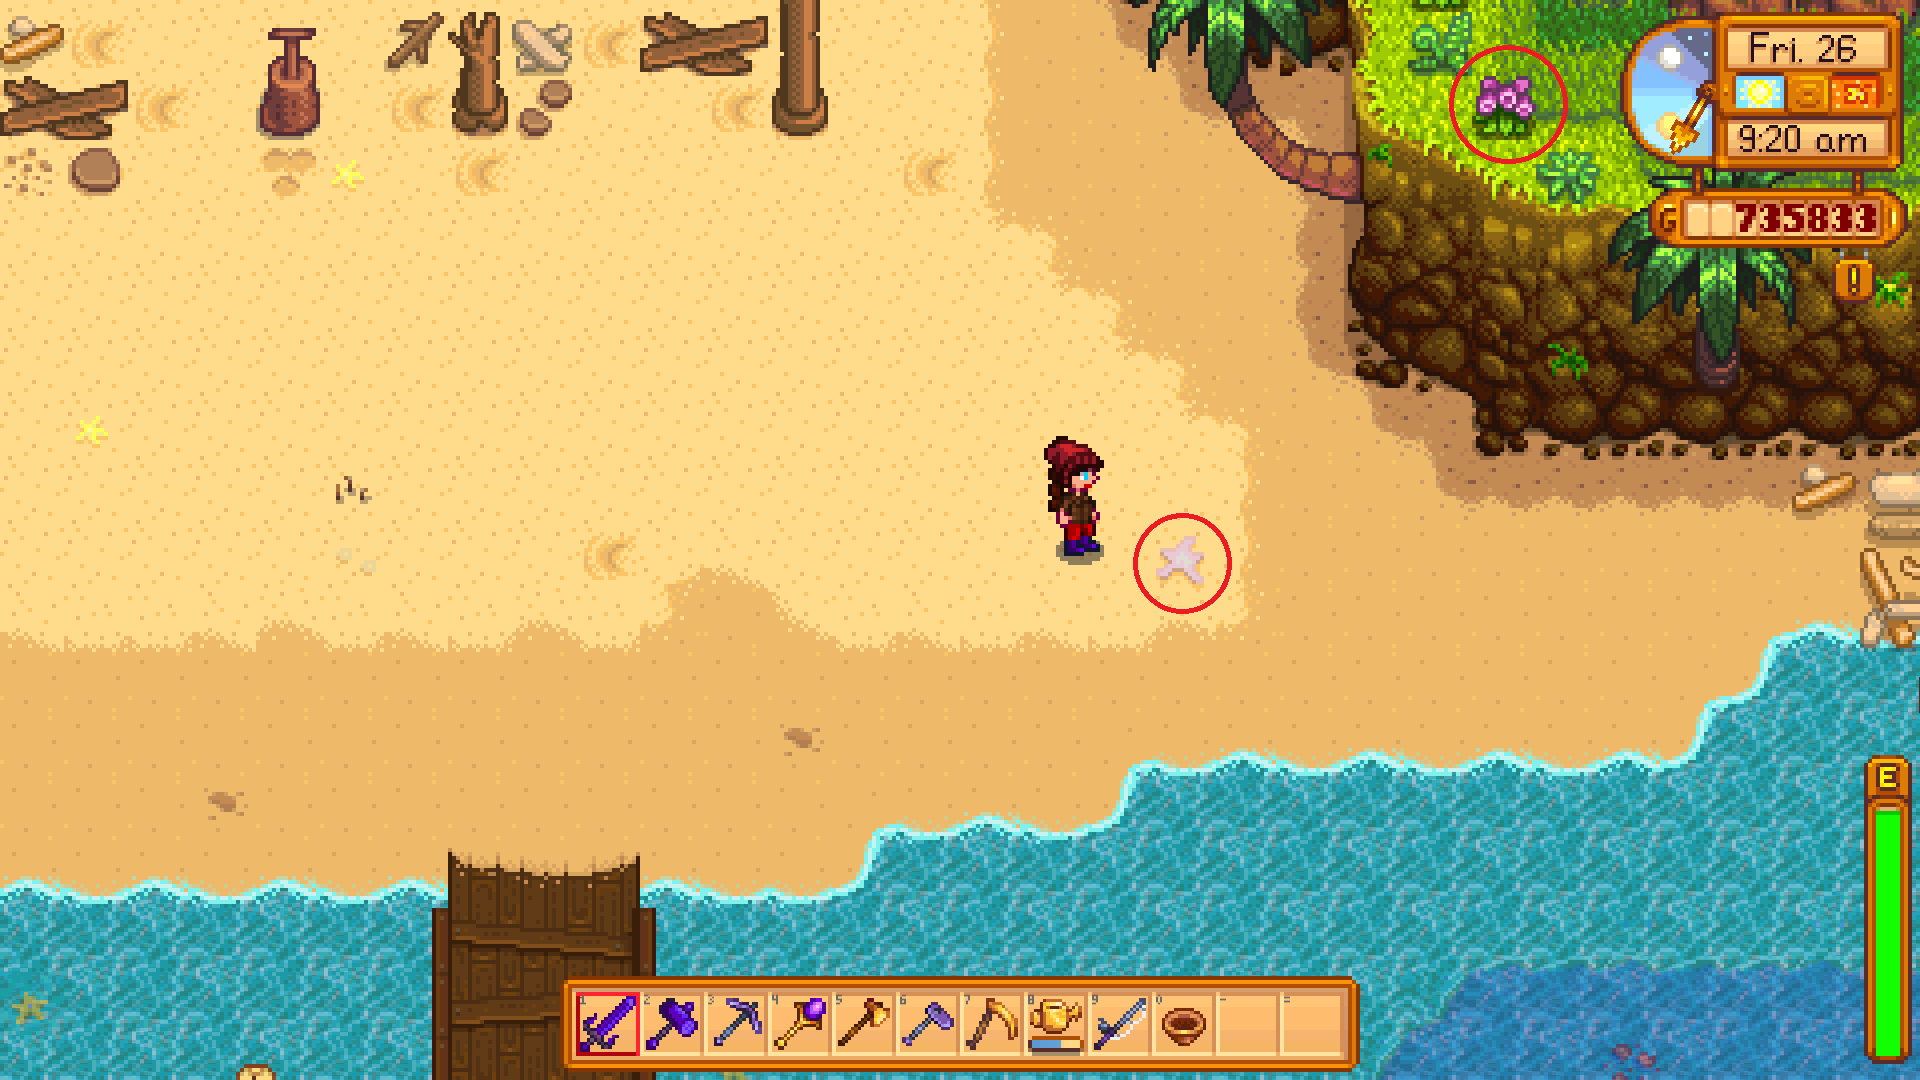 How Many Purple Starfish and Flowers in Stardew Valley?